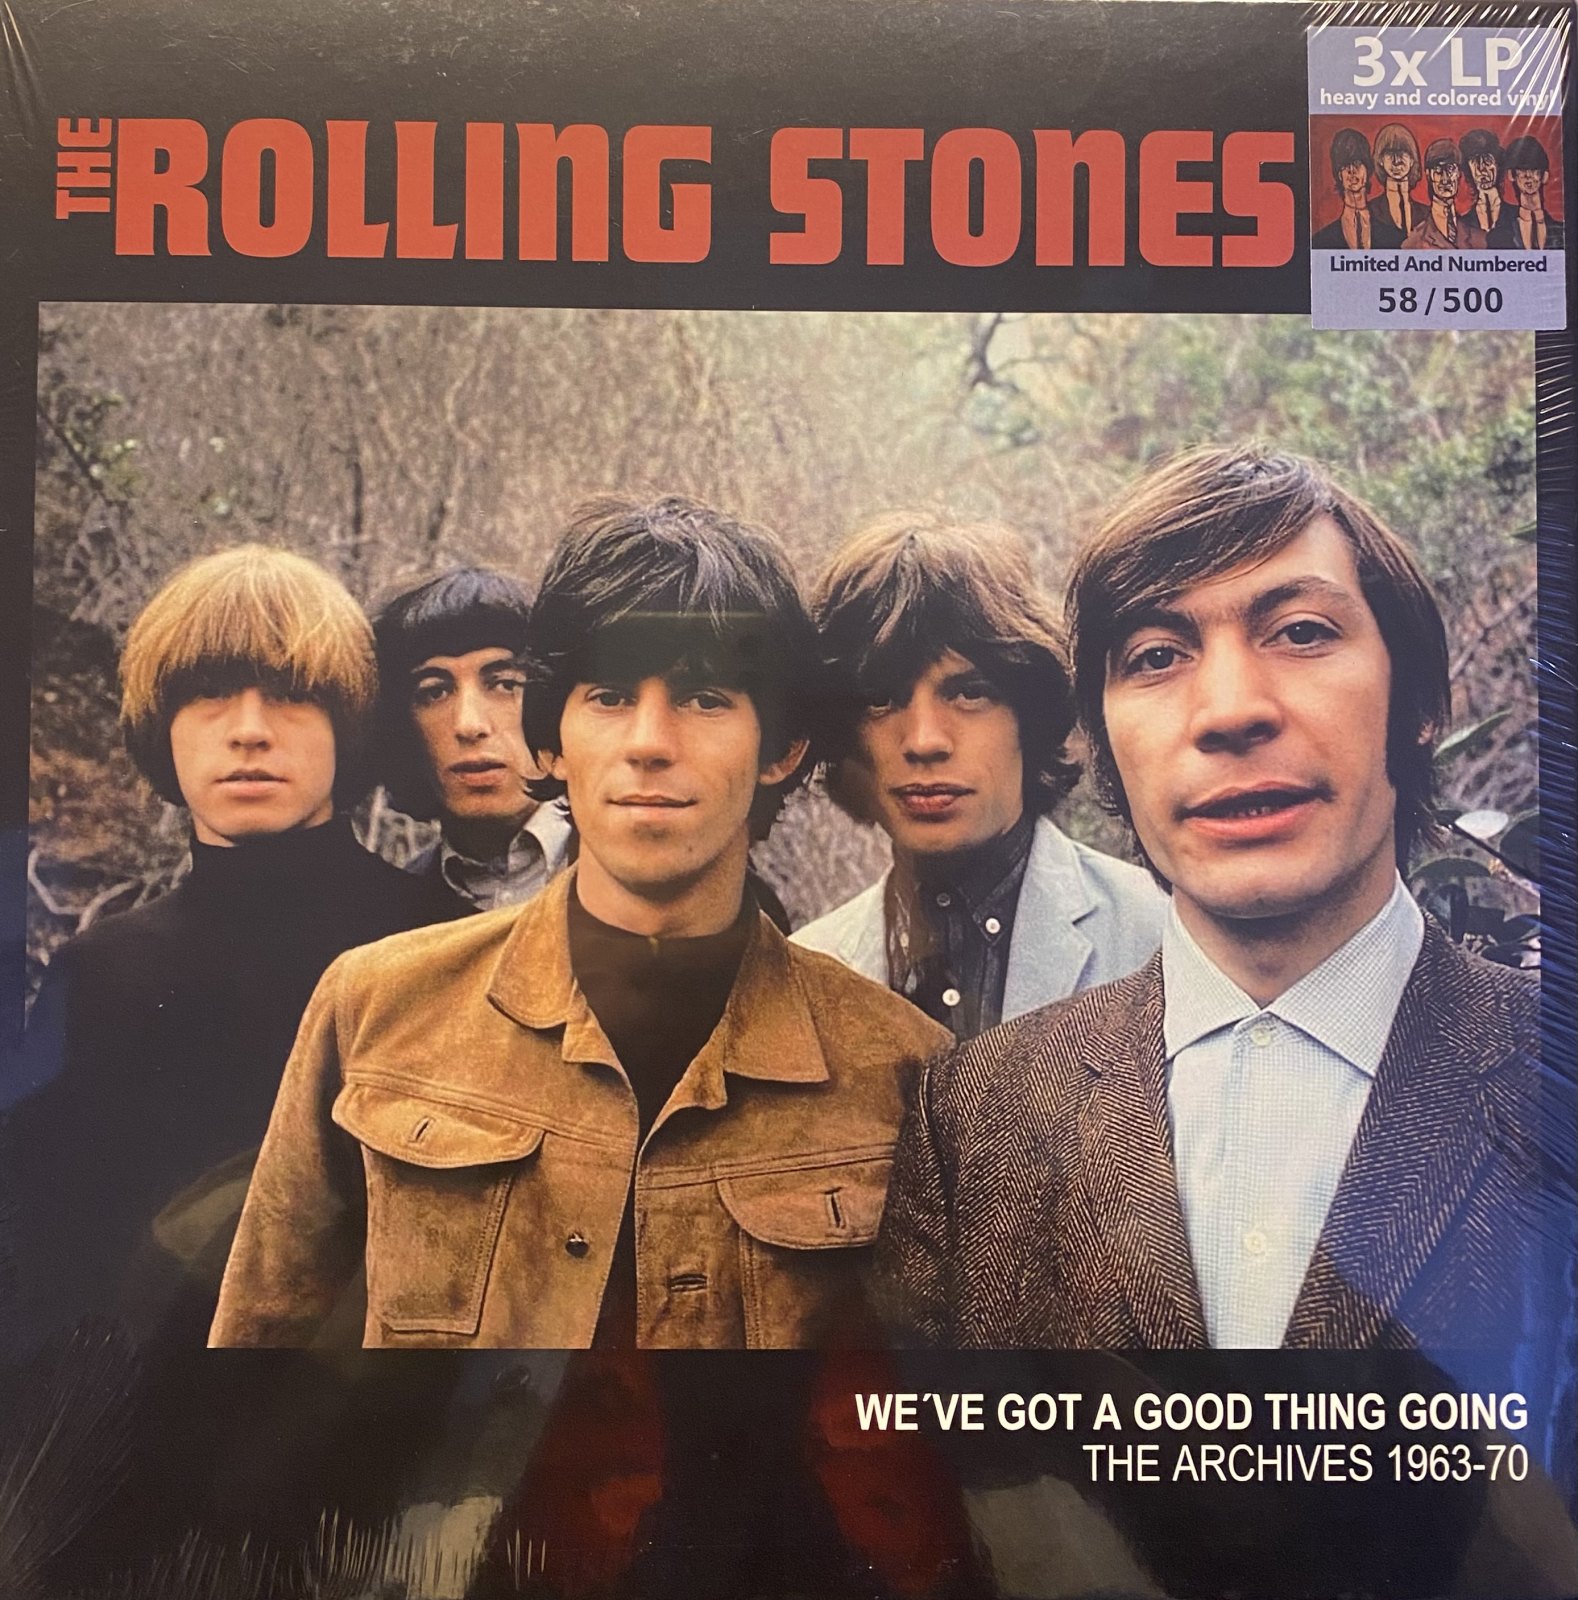 ROLLING STONES - WE'VE GOT A GOOD THING GOING: ARCHIVES 1963-70 - NUMBERED EDITION